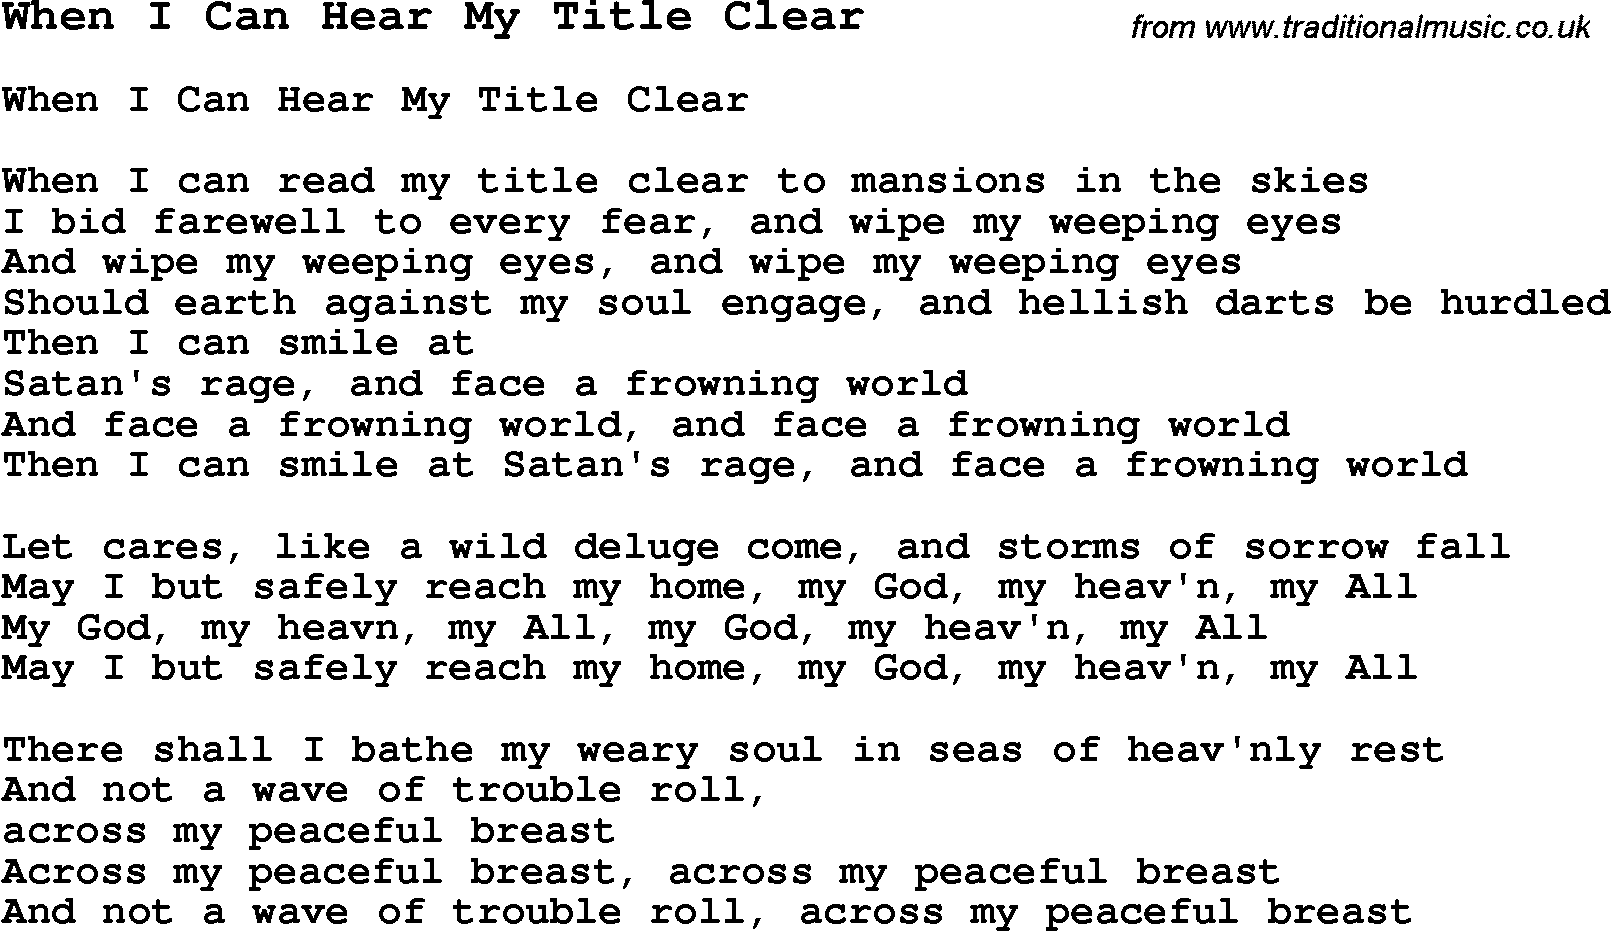 Negro Spiritual Song Lyrics for When I Can Hear My Title Clear